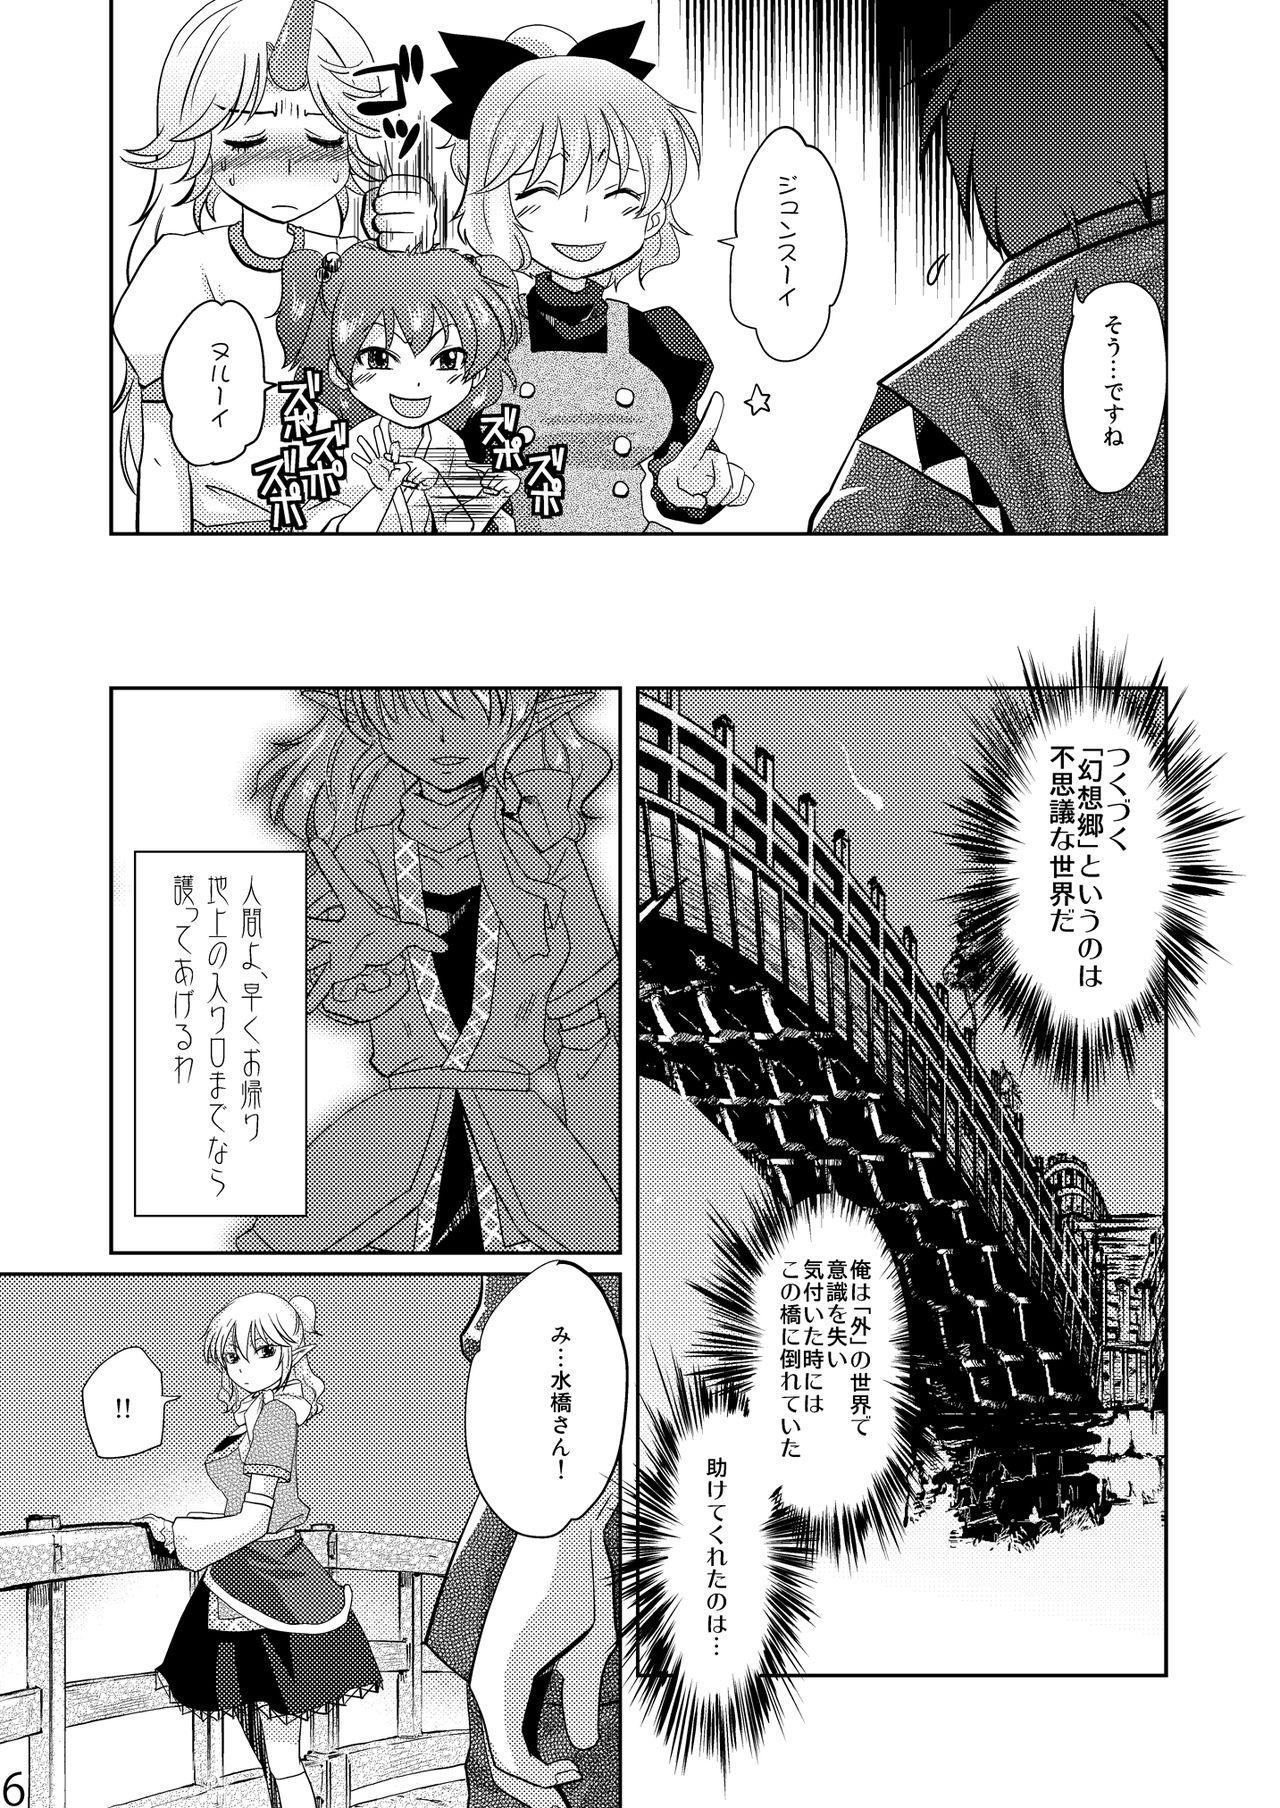 Flashing Opparusui - Touhou project Fingers - Page 6